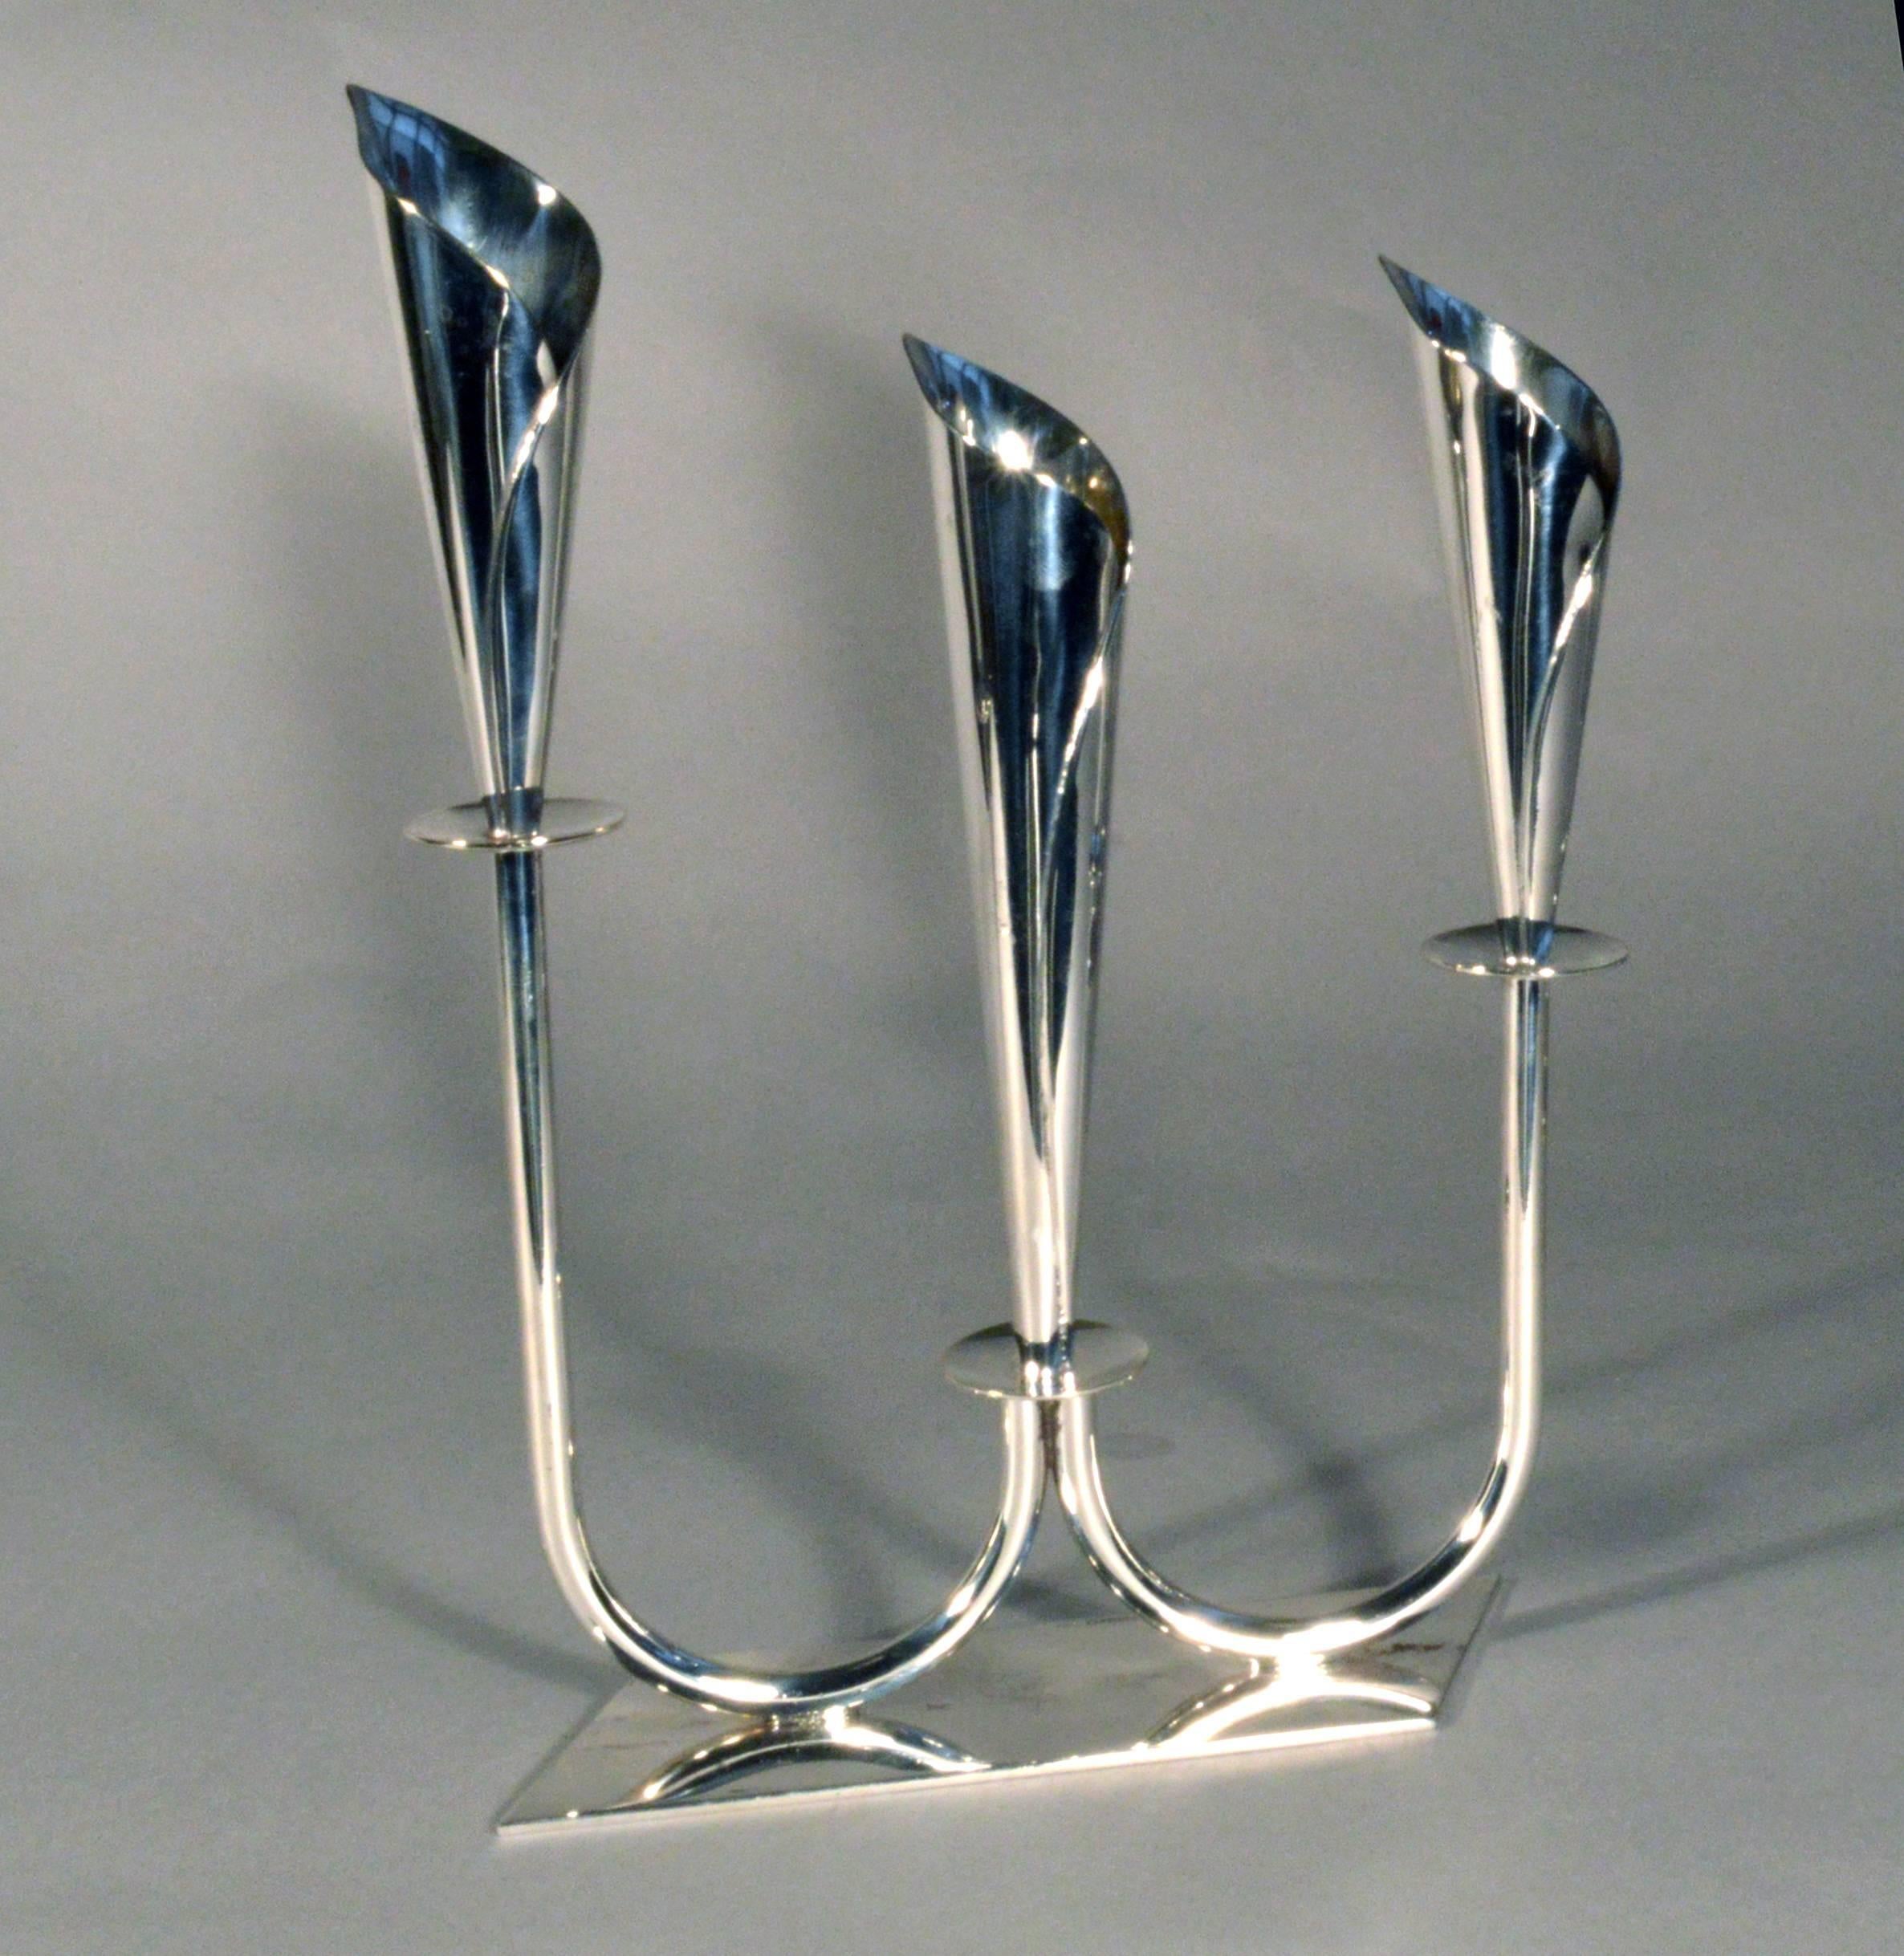 Midcentury Danish silver plate triple candelabra,
Hans Jensen,
1950s.

The candelabra on a shaped, slanted four-sided base have a W-form triple stem, each stem rising to a Calla Lilly sconce with a small drip pan below the